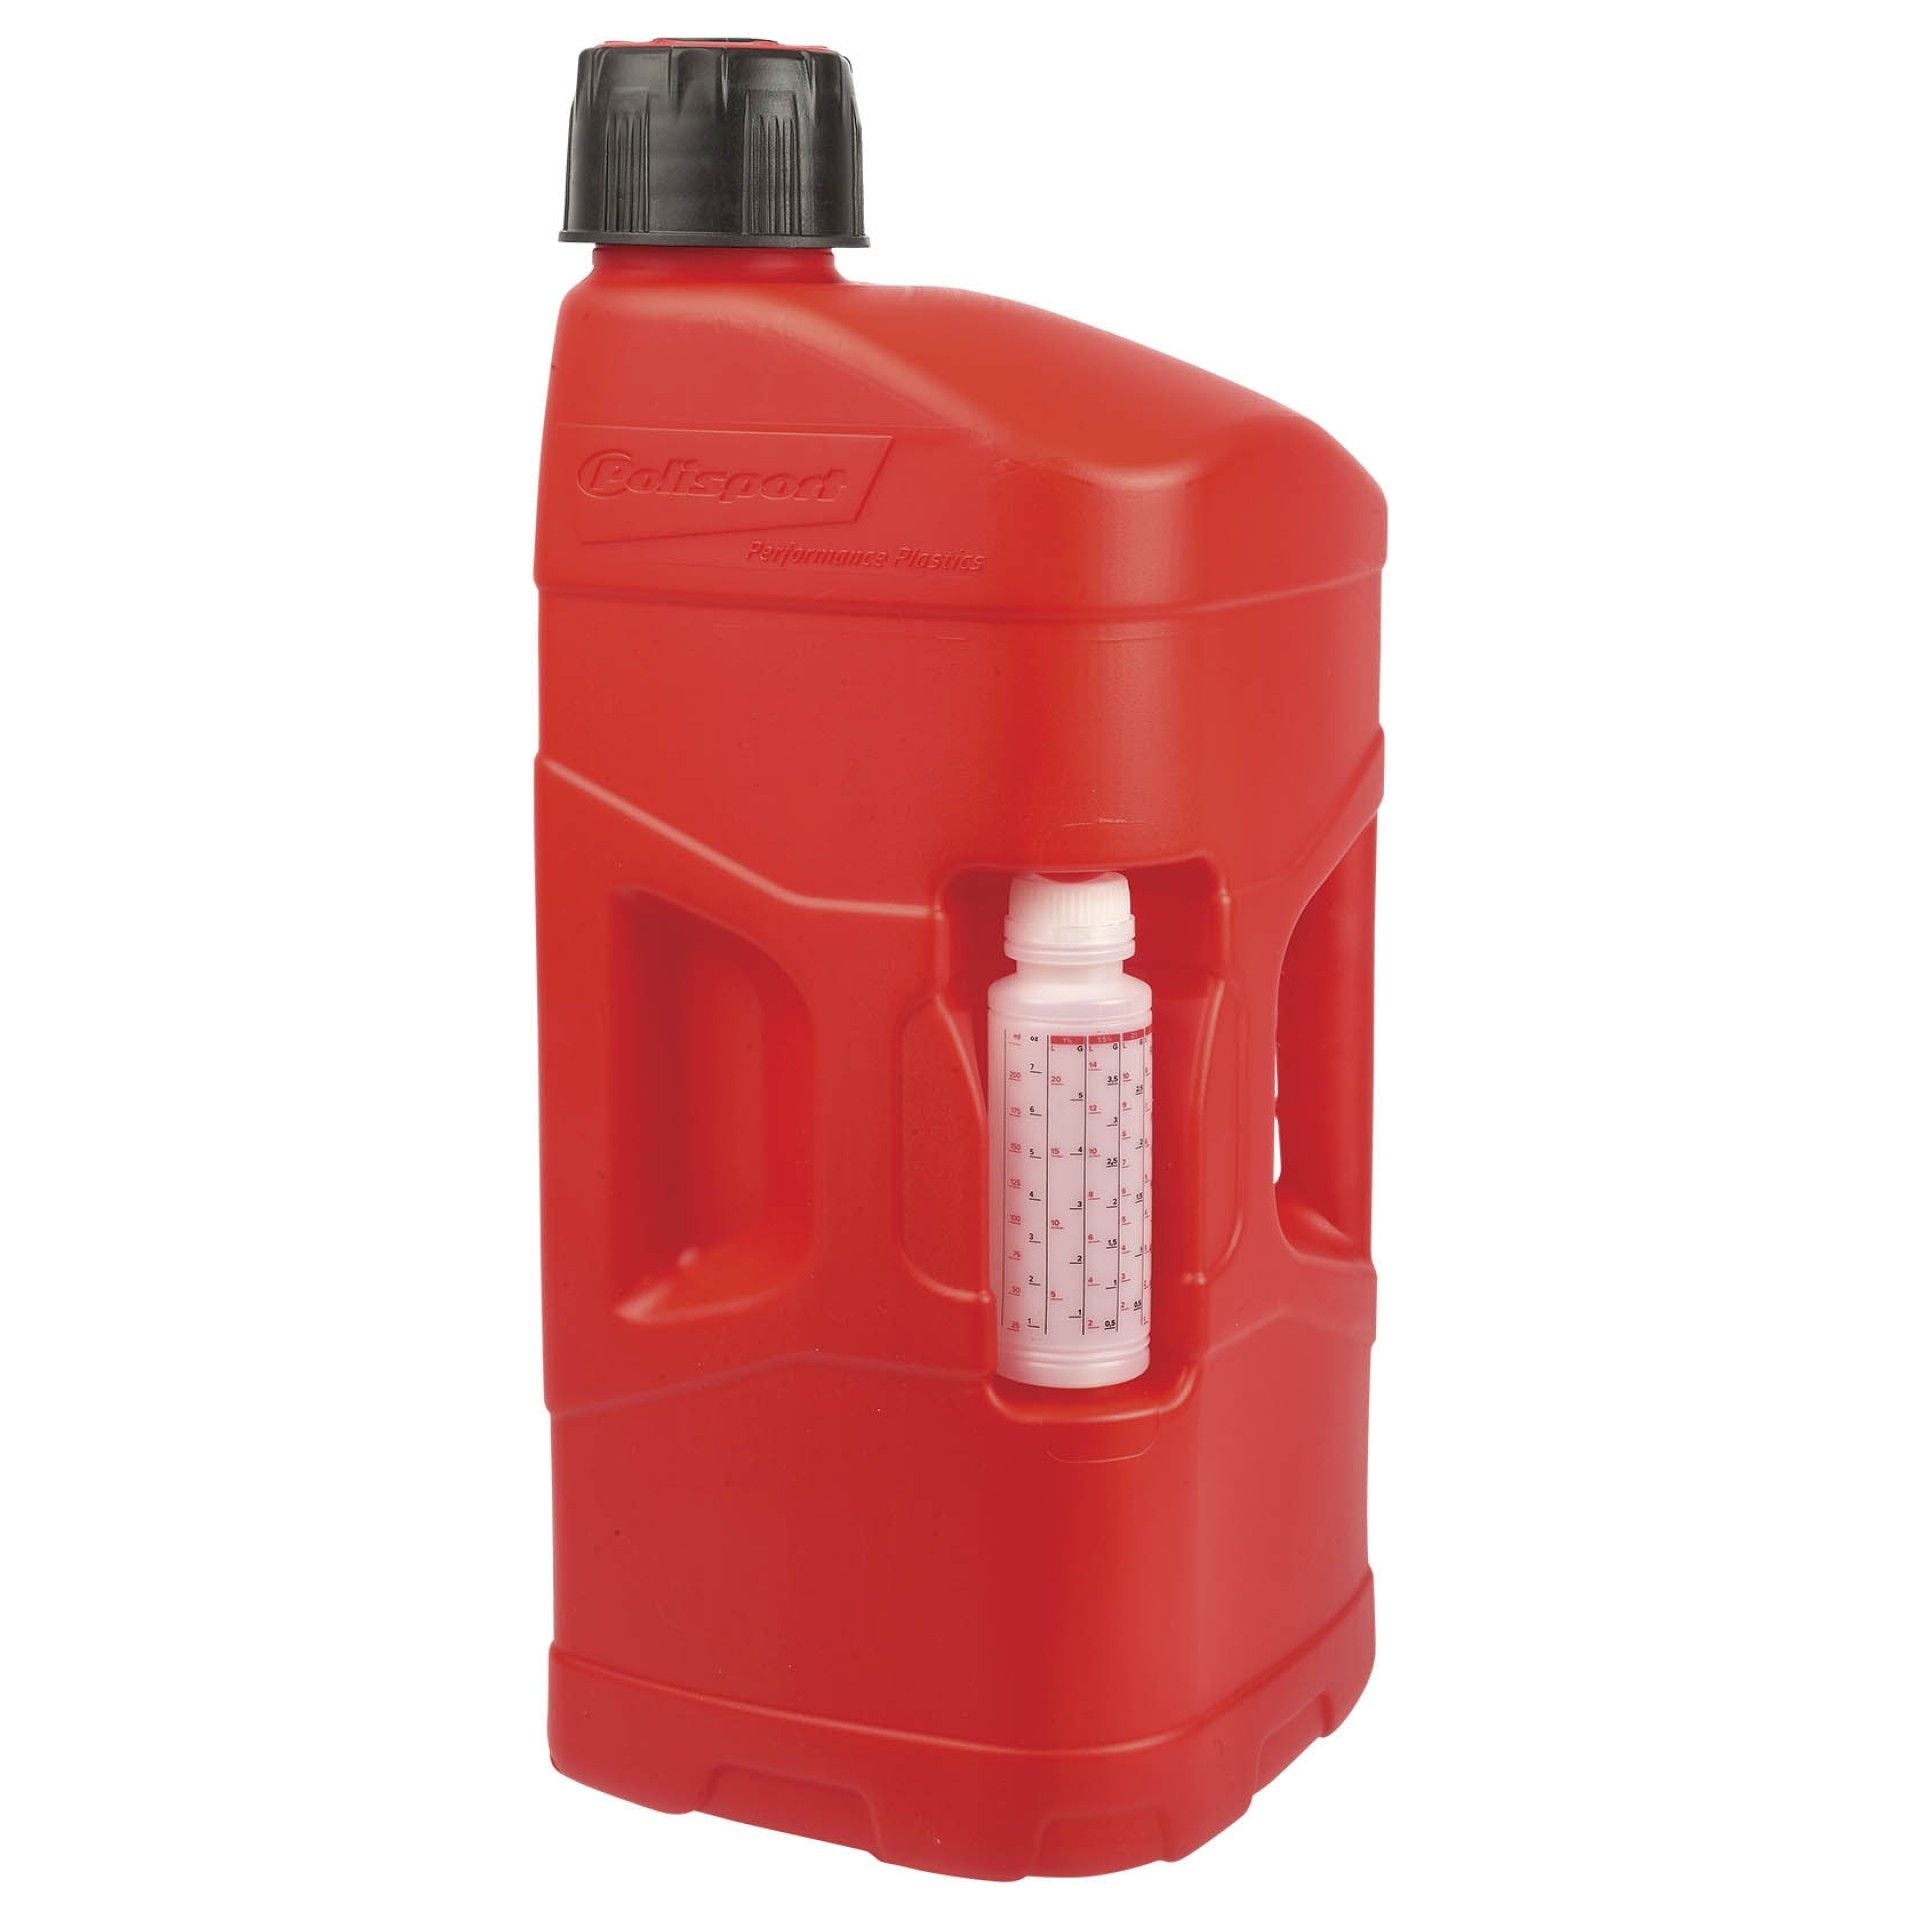 Polisport Pro-Octane 20 Litre Fuel Can with Fill Hose